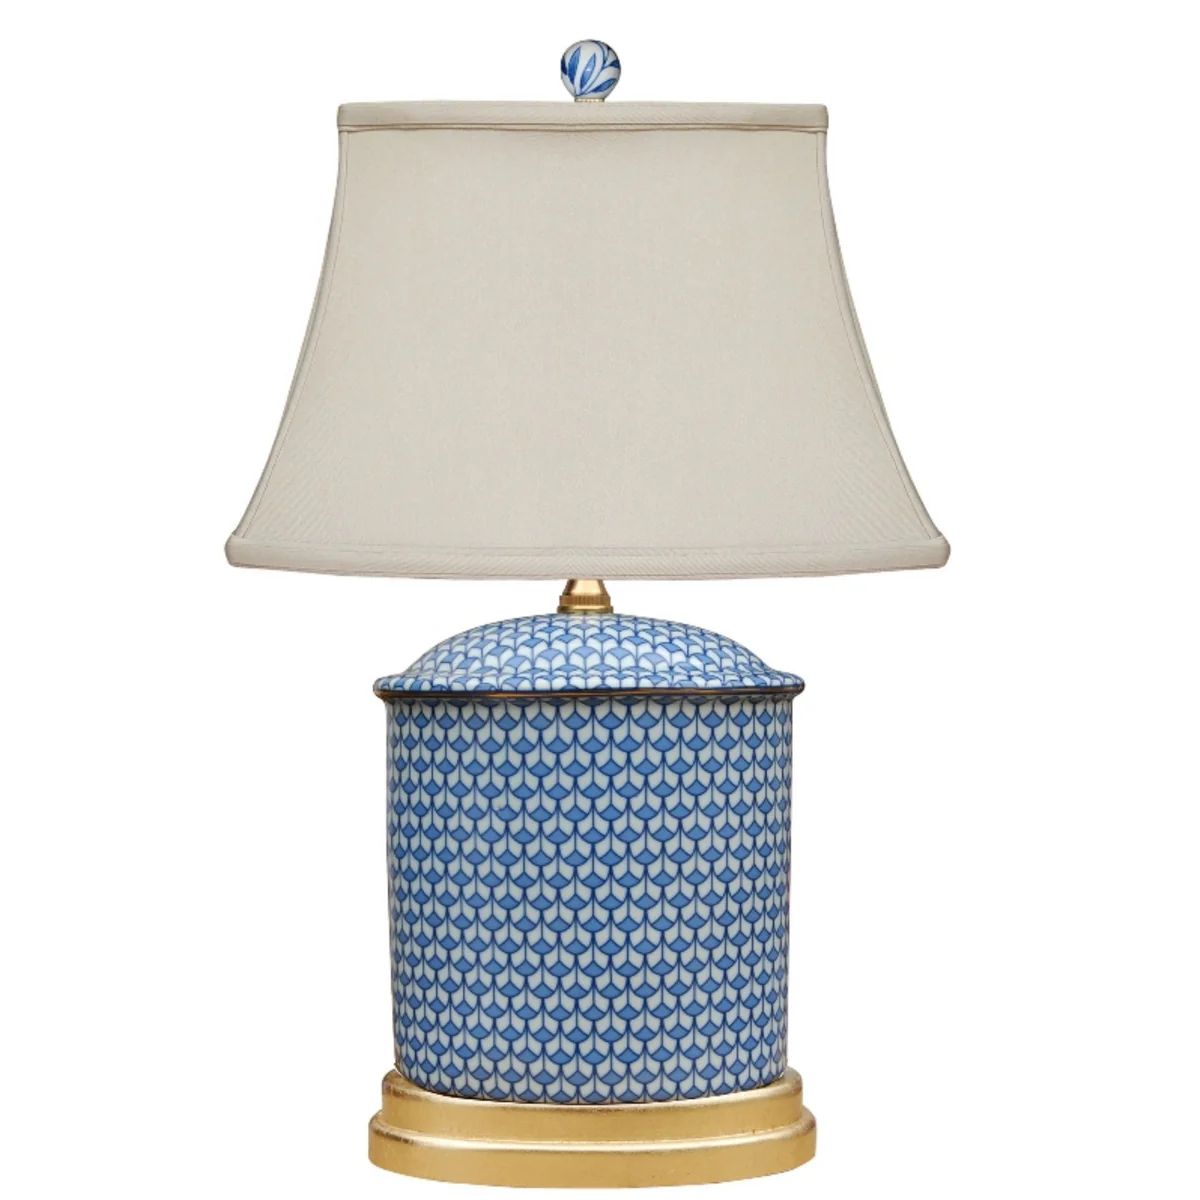 English Blue and White Porcelain Table Lamp | Mintwood Home